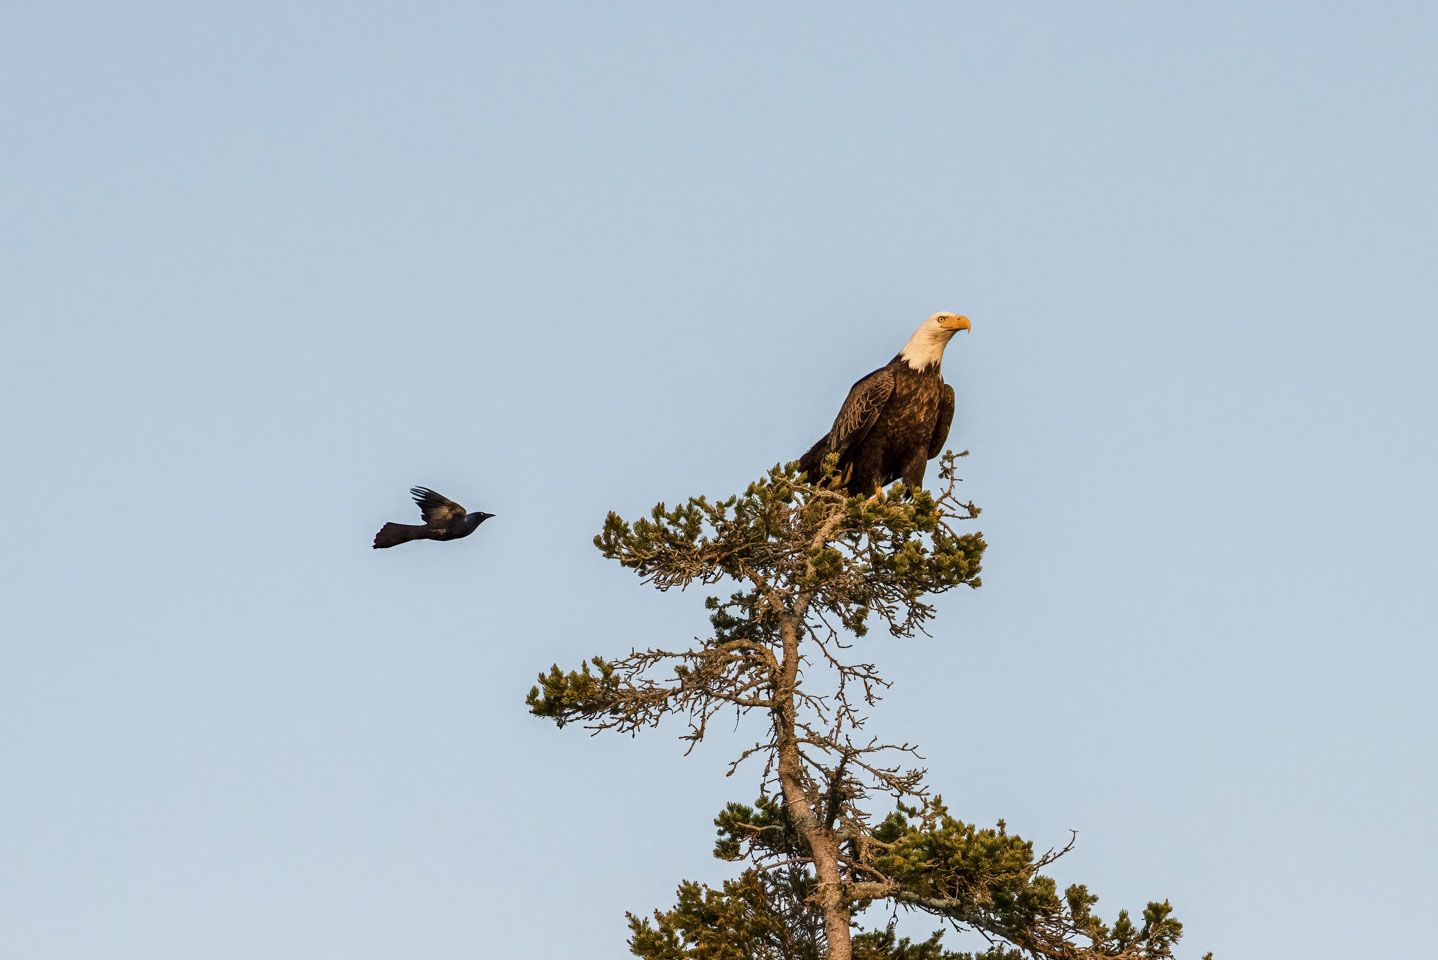 Small black bird flying by an Eagle that is in a tree